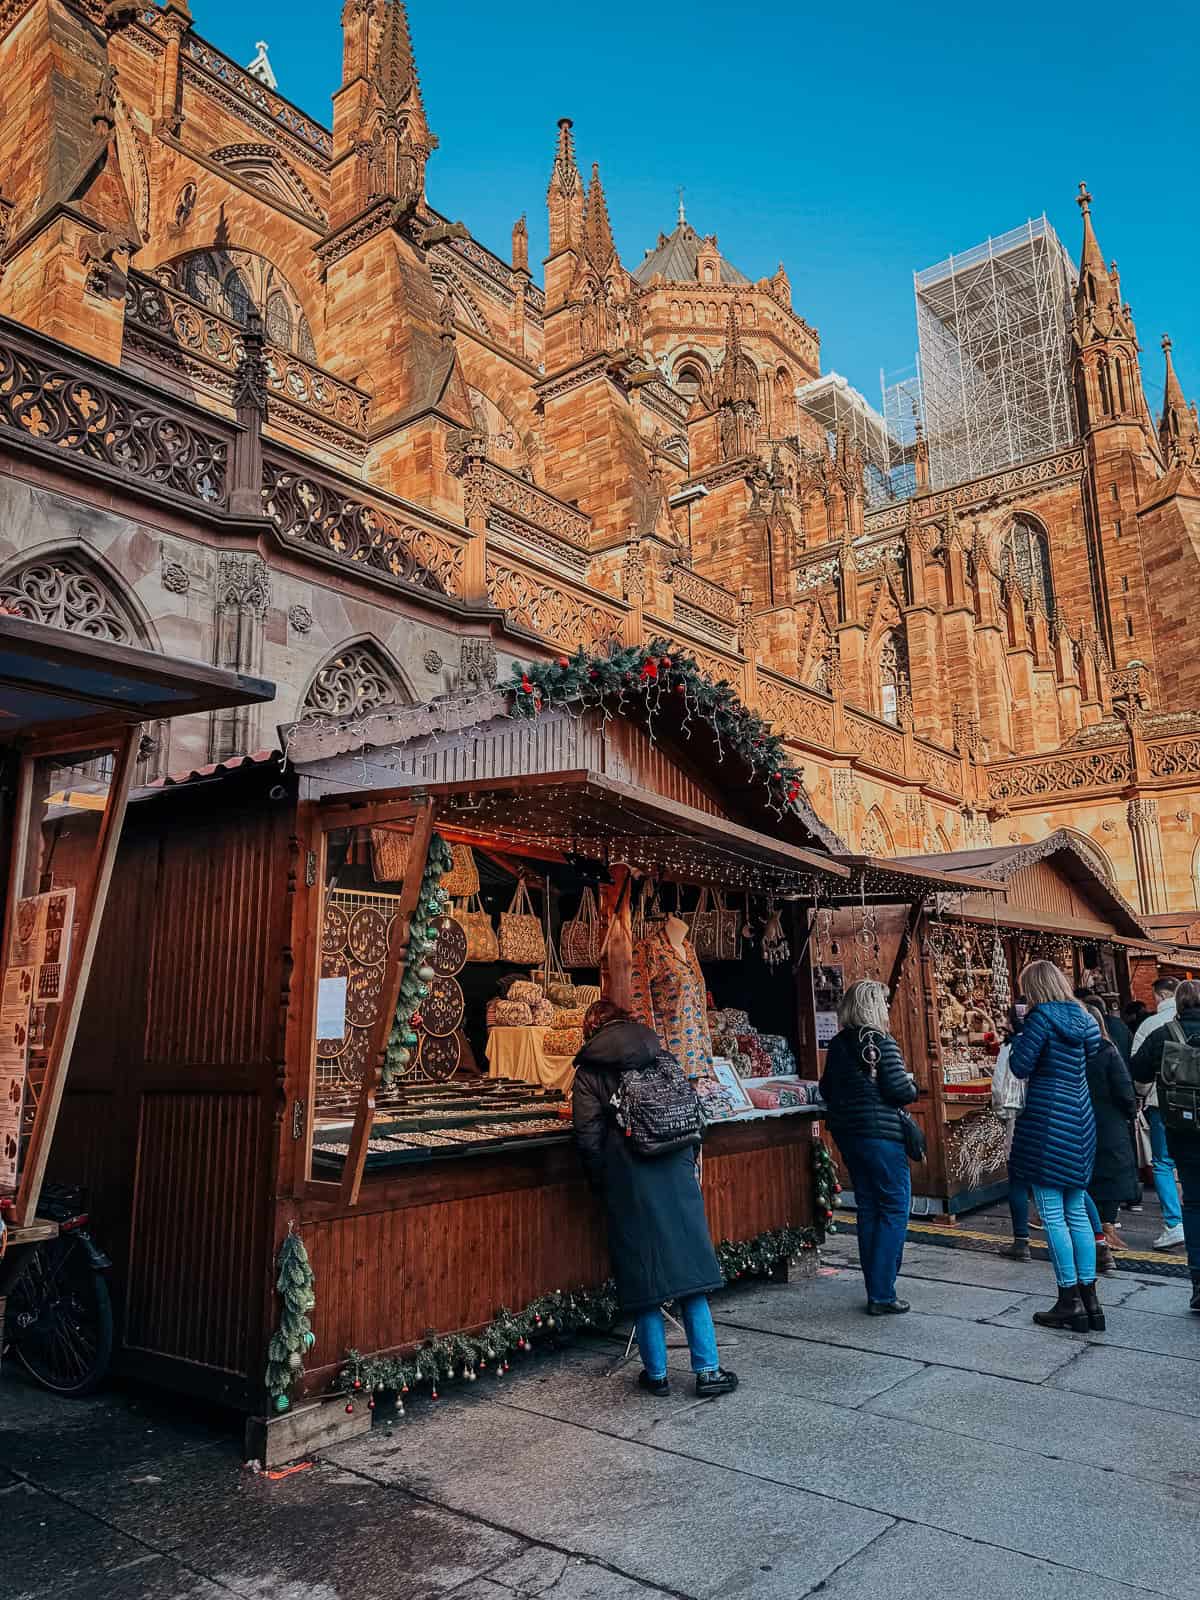 A majestic Gothic cathedral rising behind a Christmas market, with visitors gathered around various stalls under a clear blue sky.